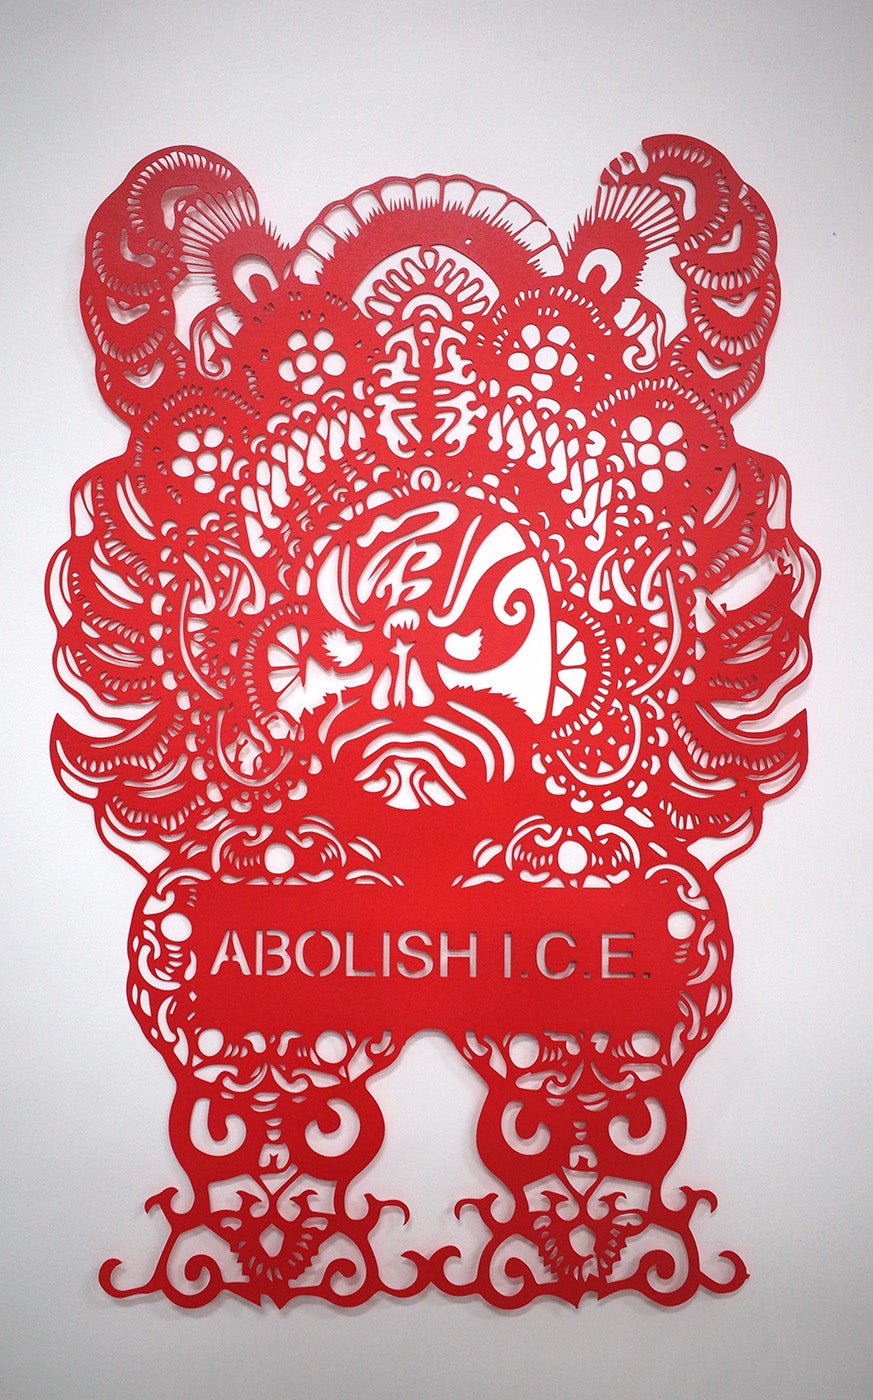 Red paper cutting that reads "ABOLISH ICE"